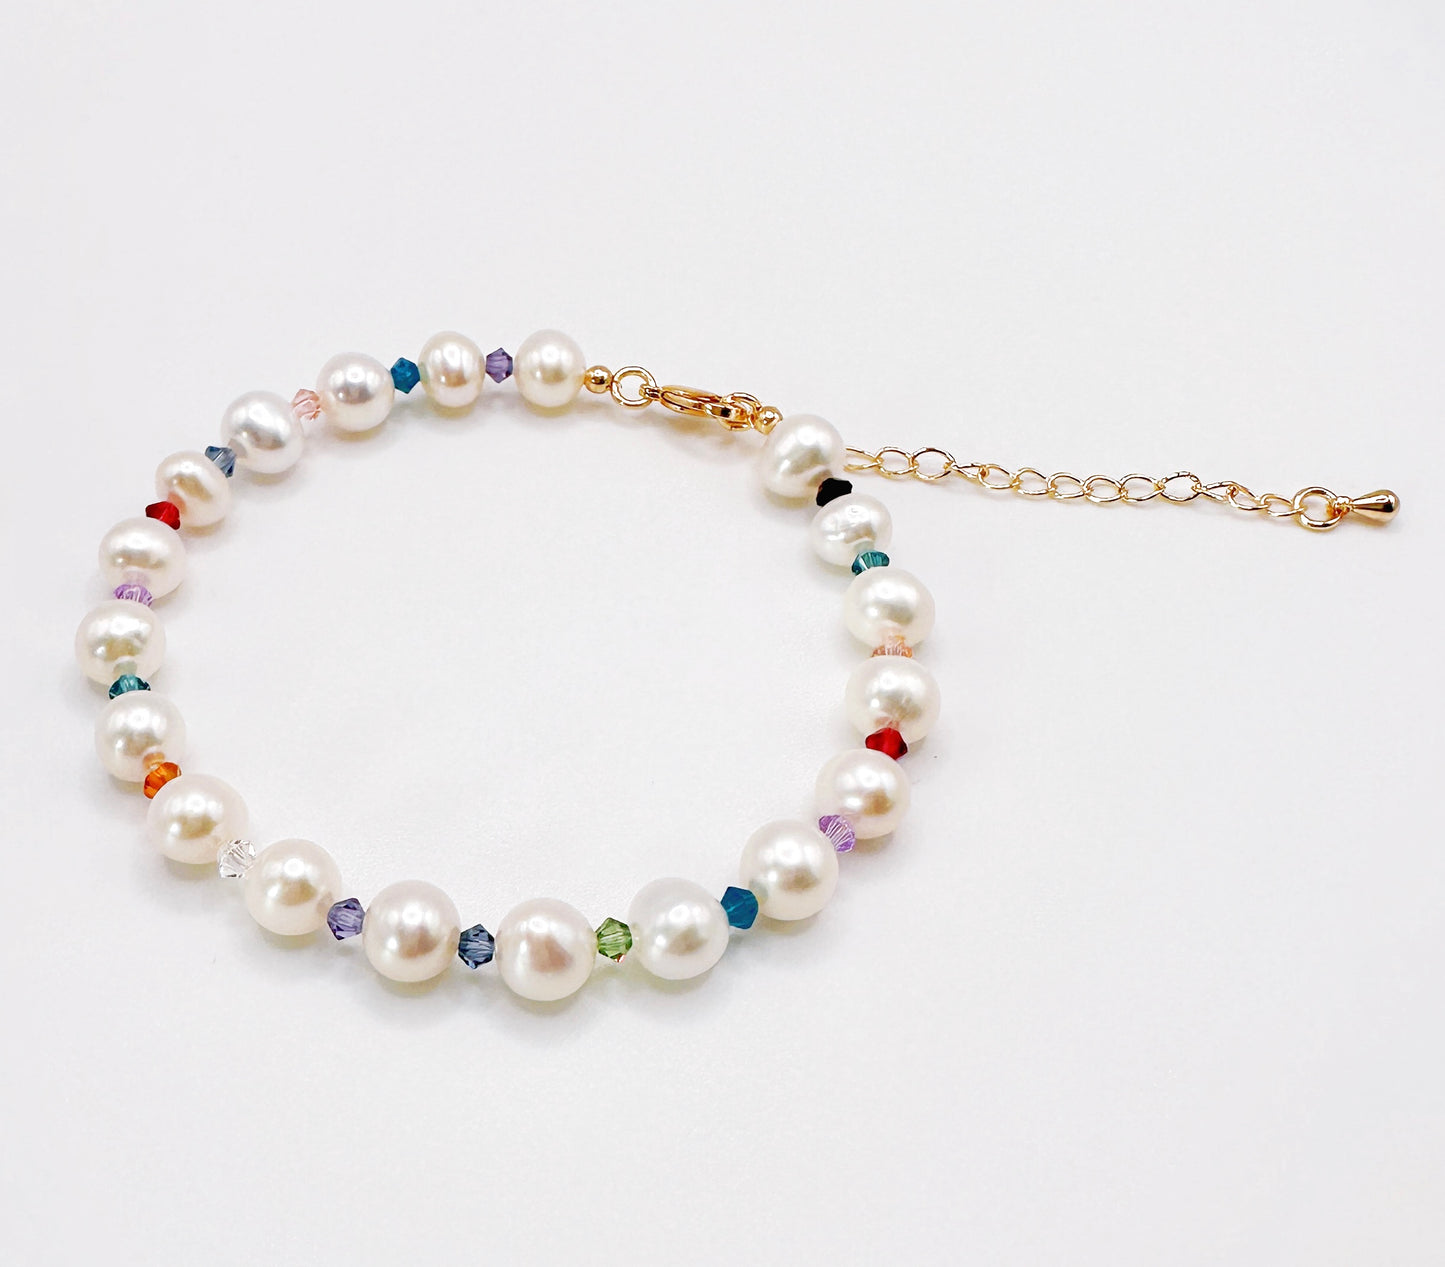 "Sparkling Harmony" 6mm Freshwater Pearl Bracelet with Multicolored Crystal Accents